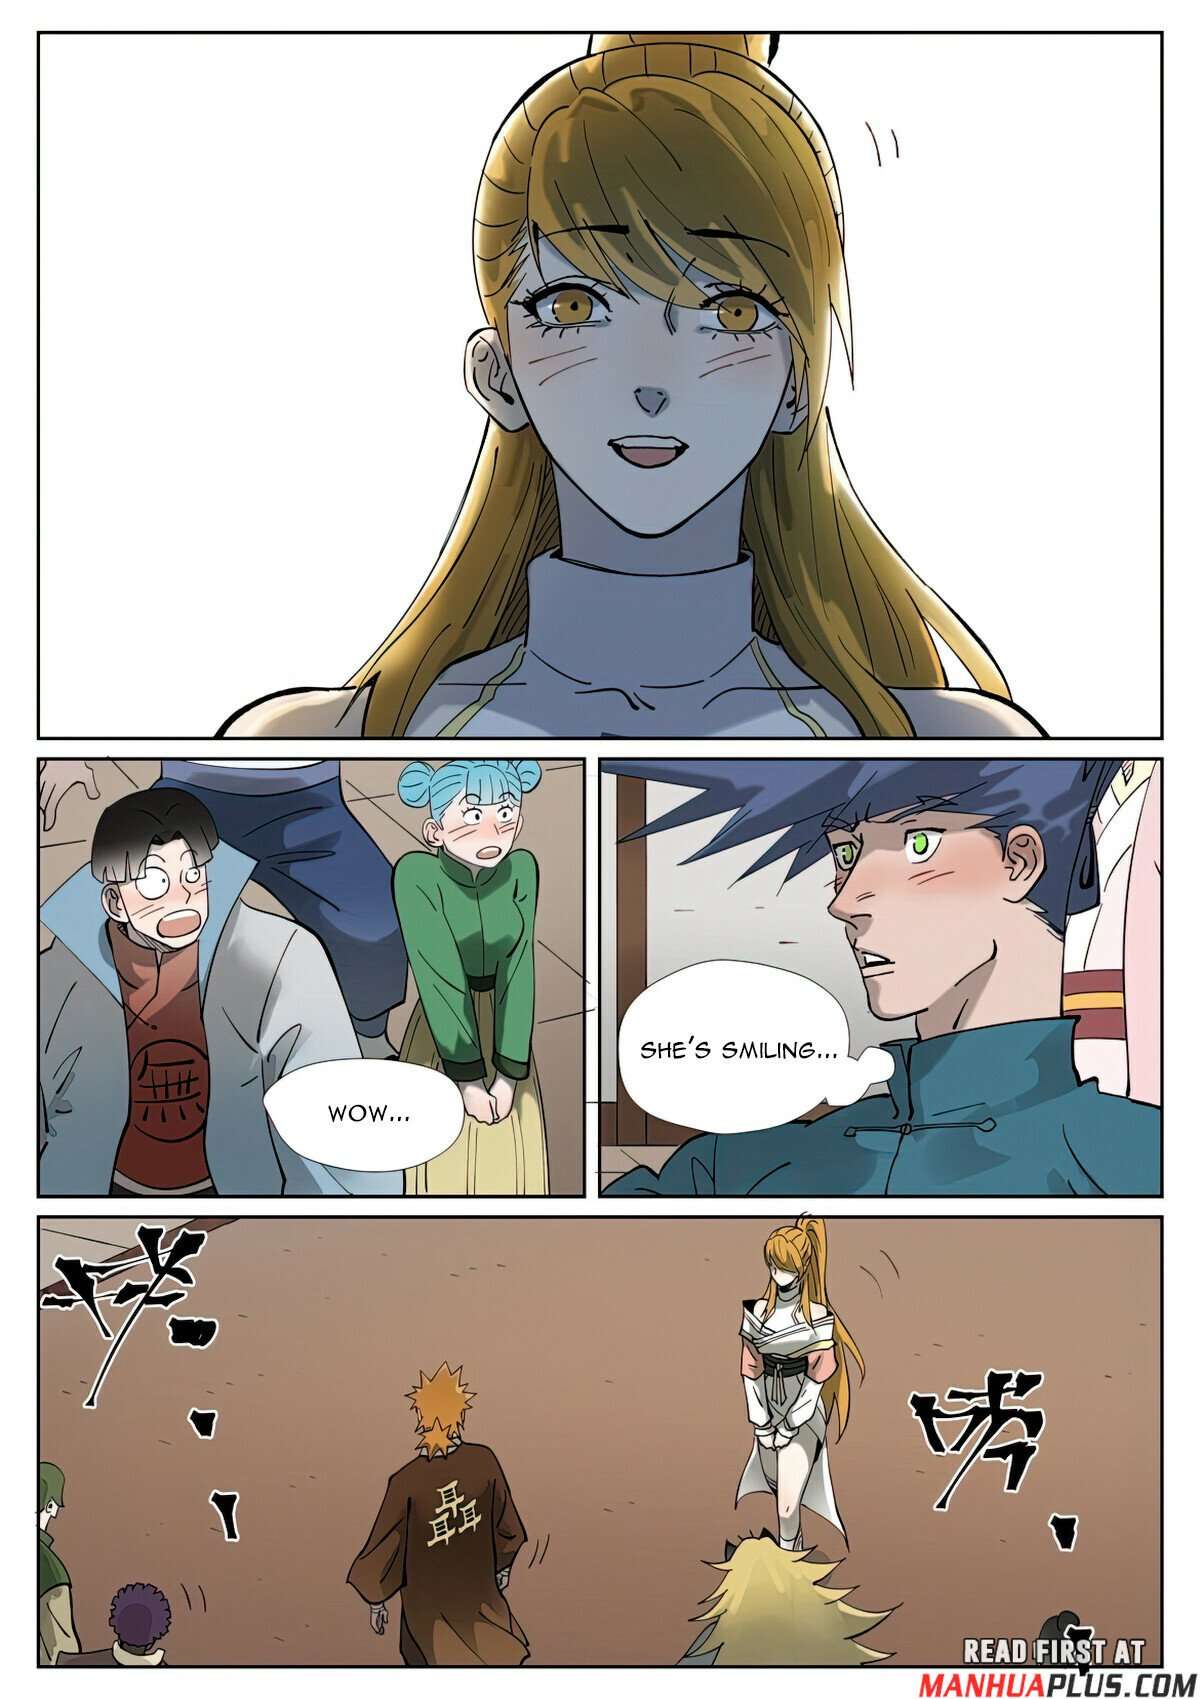 Tales of Demons and Gods - Chapter 65 Ch 065 The Abstruse Gemstone